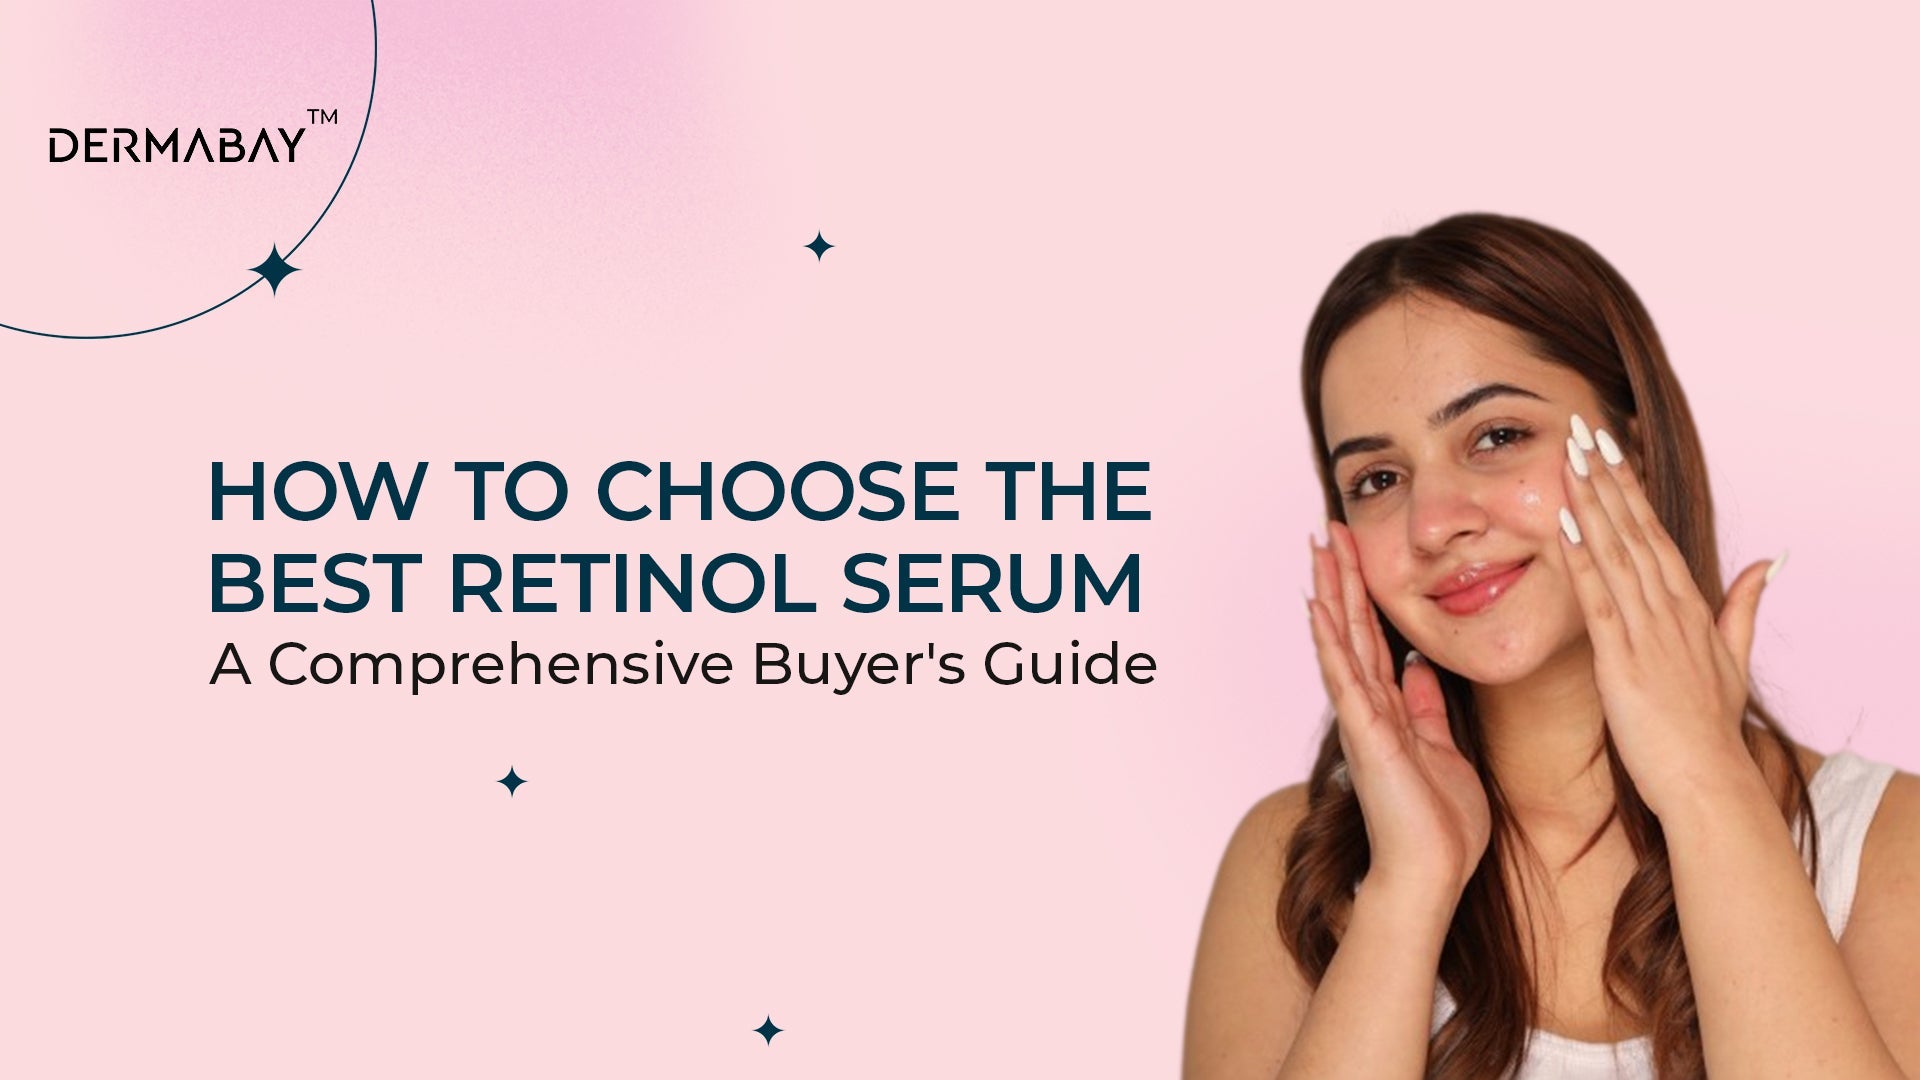 How to Choose the Best Retinol Serum: A Comprehensive Buyer's Guide - Dermabay